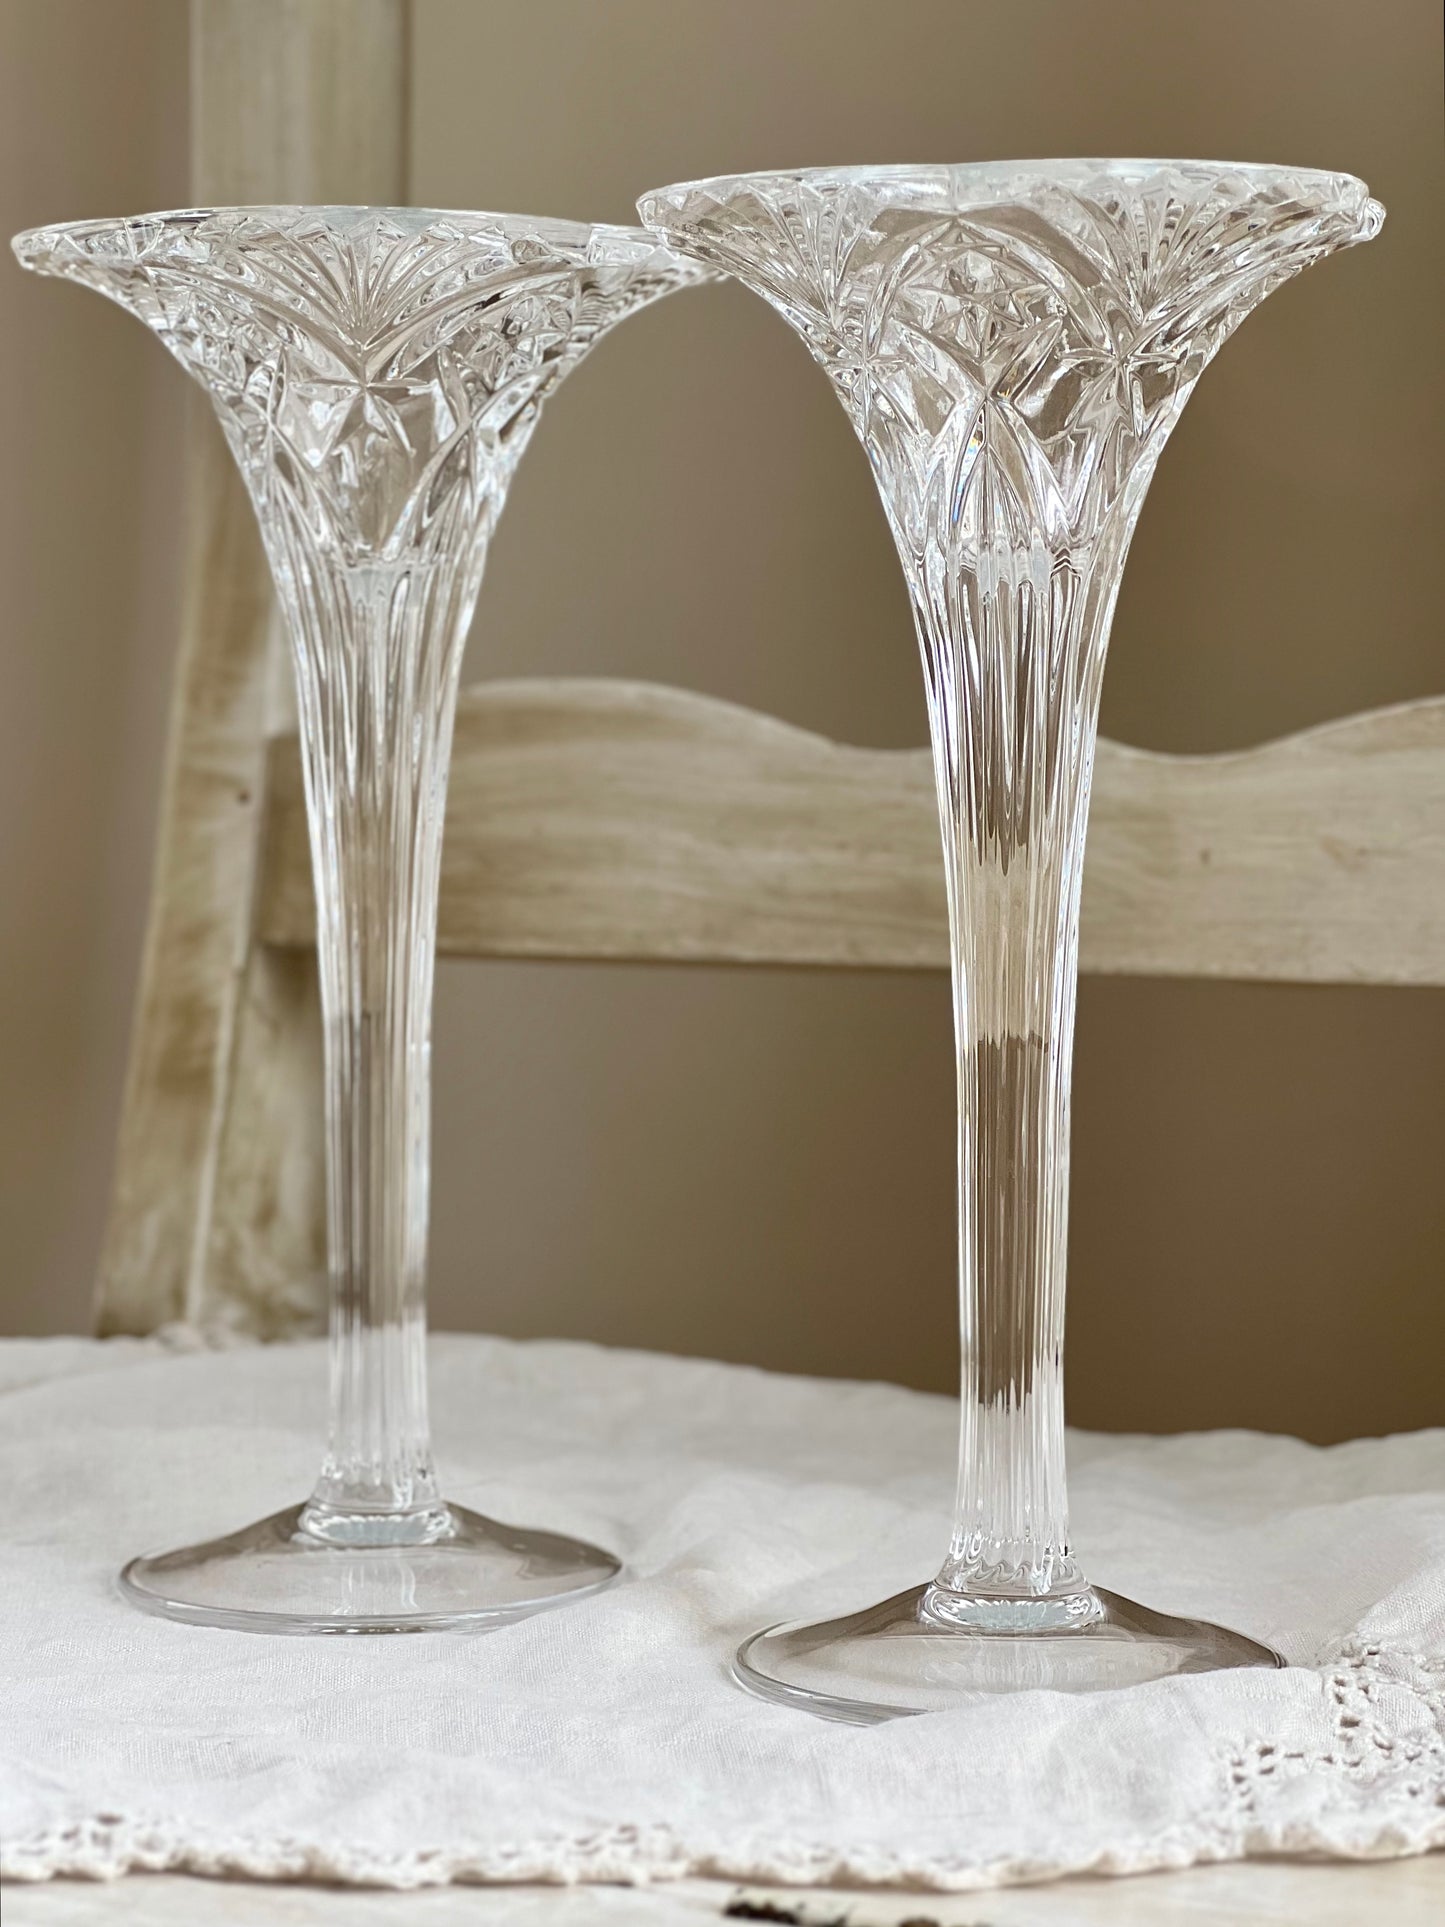 Gorgeous Pair of French Crystal Candle Holders